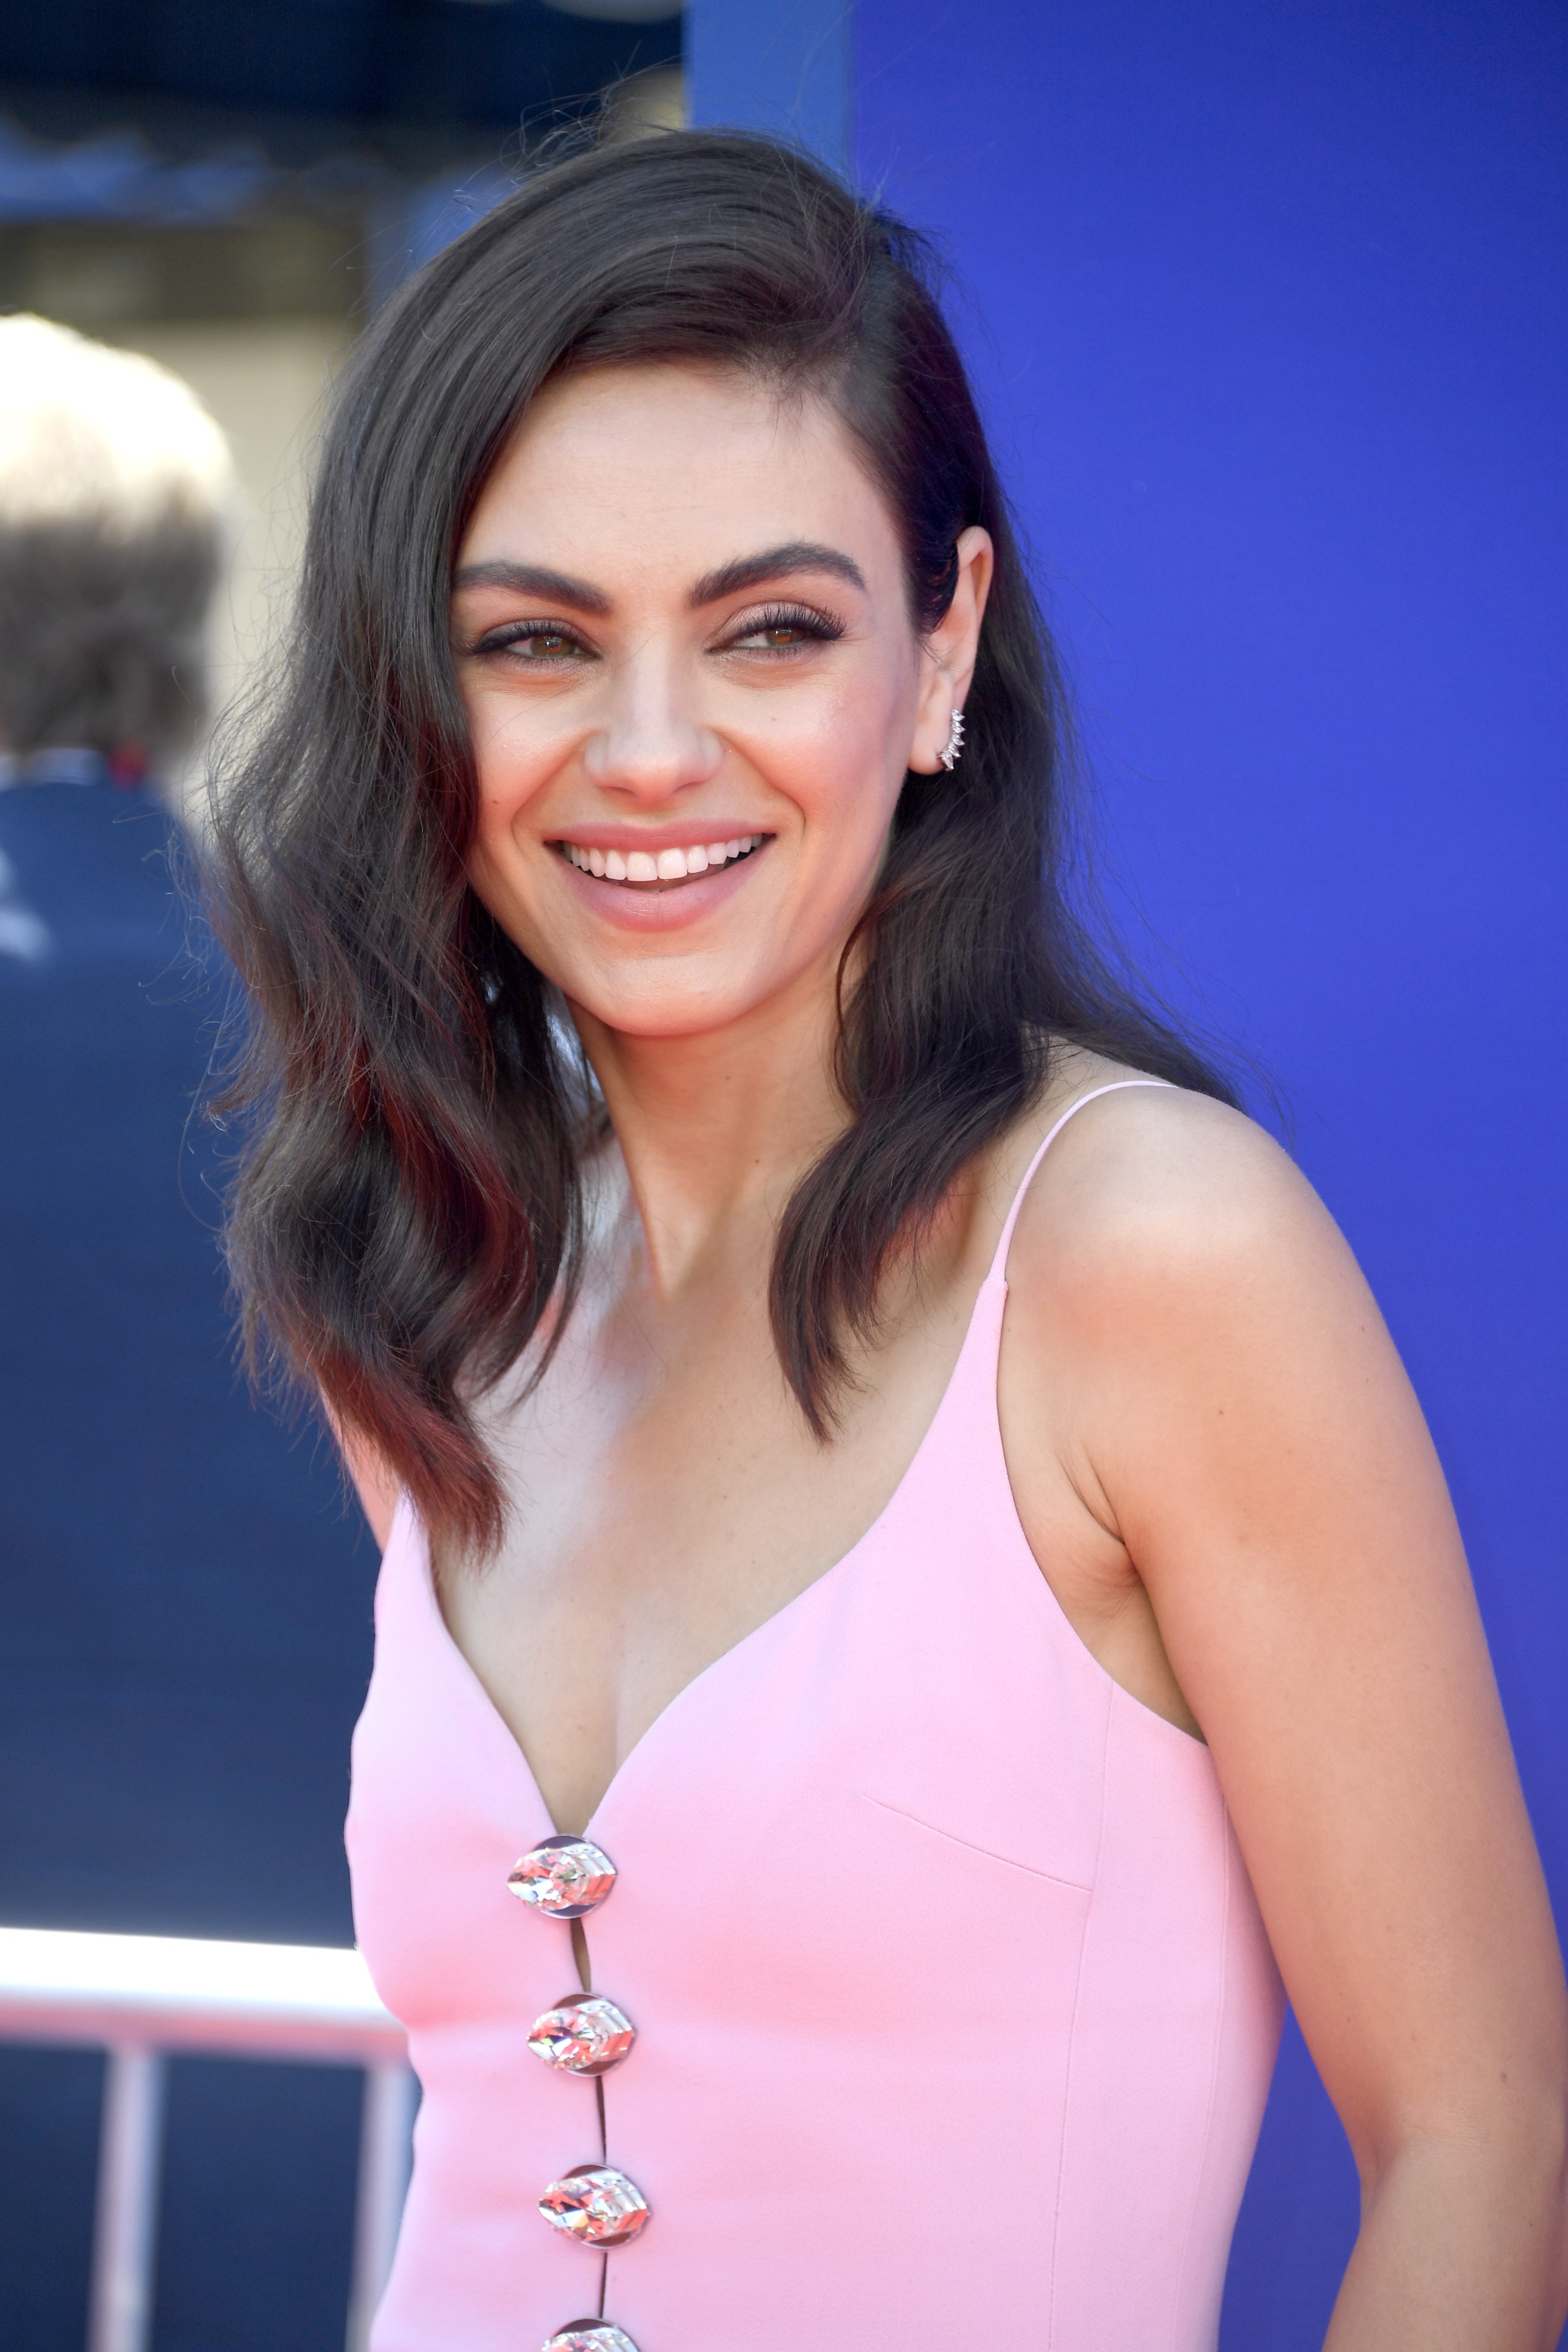 Mila Kunis at the premiere of Paramount Pictures' "Wonder Park" in Los Angeles in 2019 | Source: Getty Images